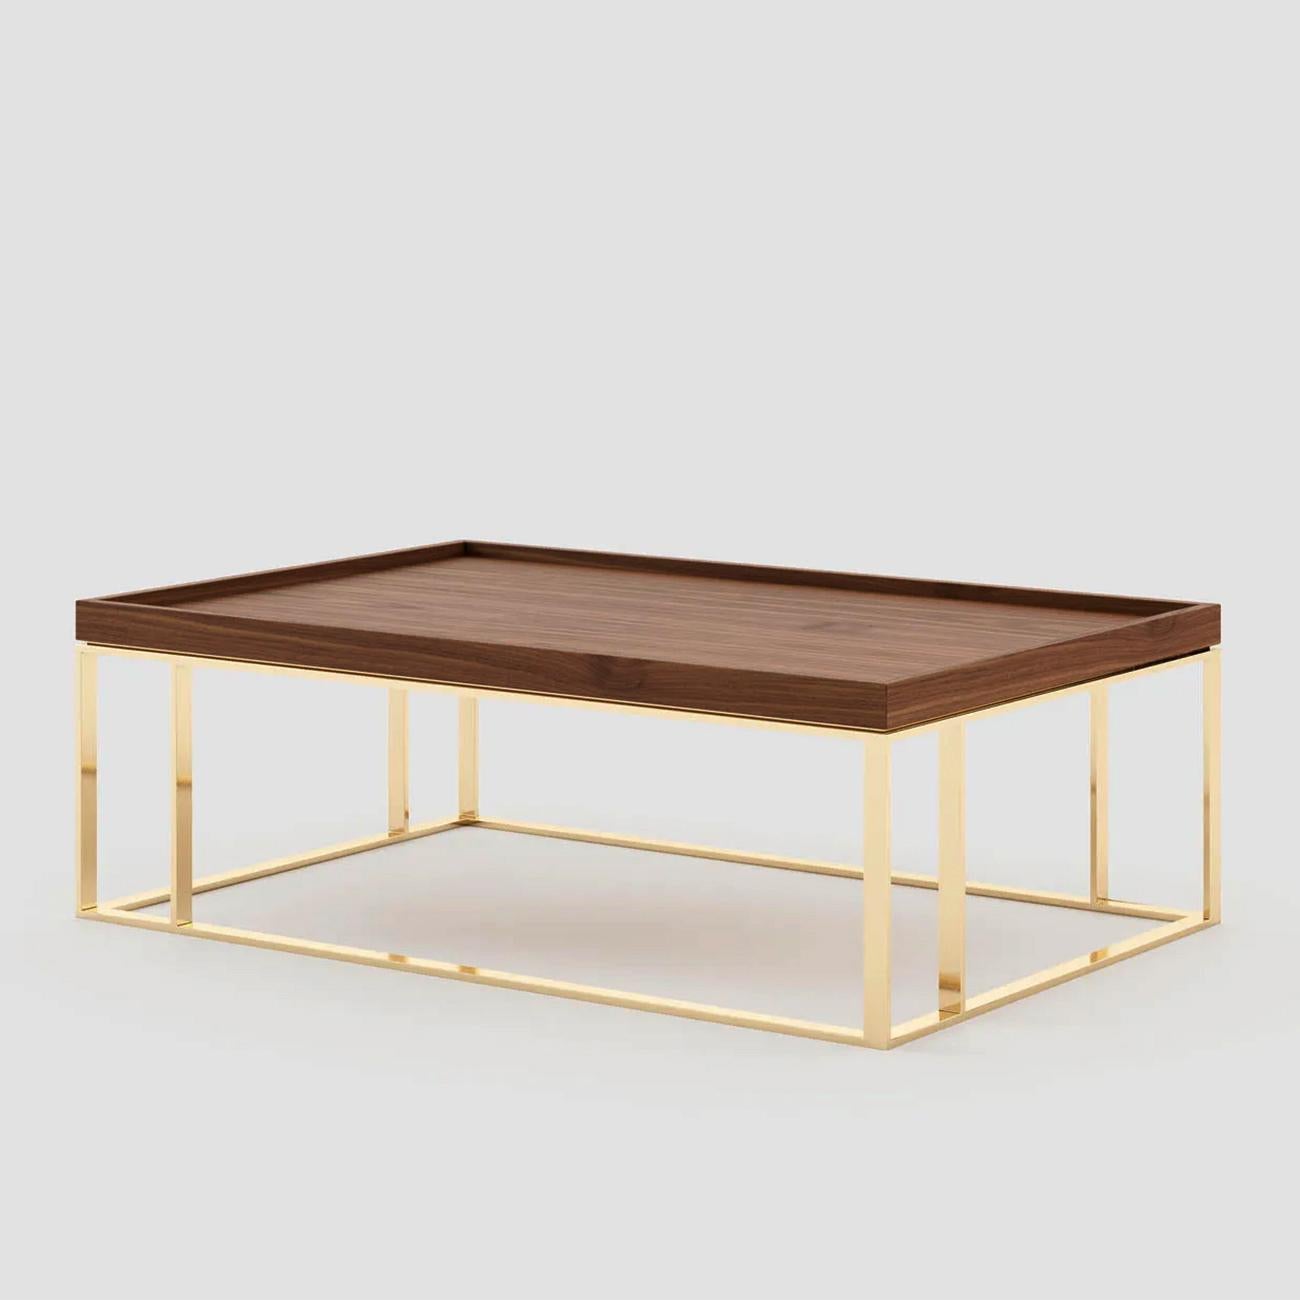 Coffee table slater with solid walnut top and
with polished stainless steel base in gold finish.
Also available with other wooden finishes for top
and other stainless steel finishes, on request including
up-charge.